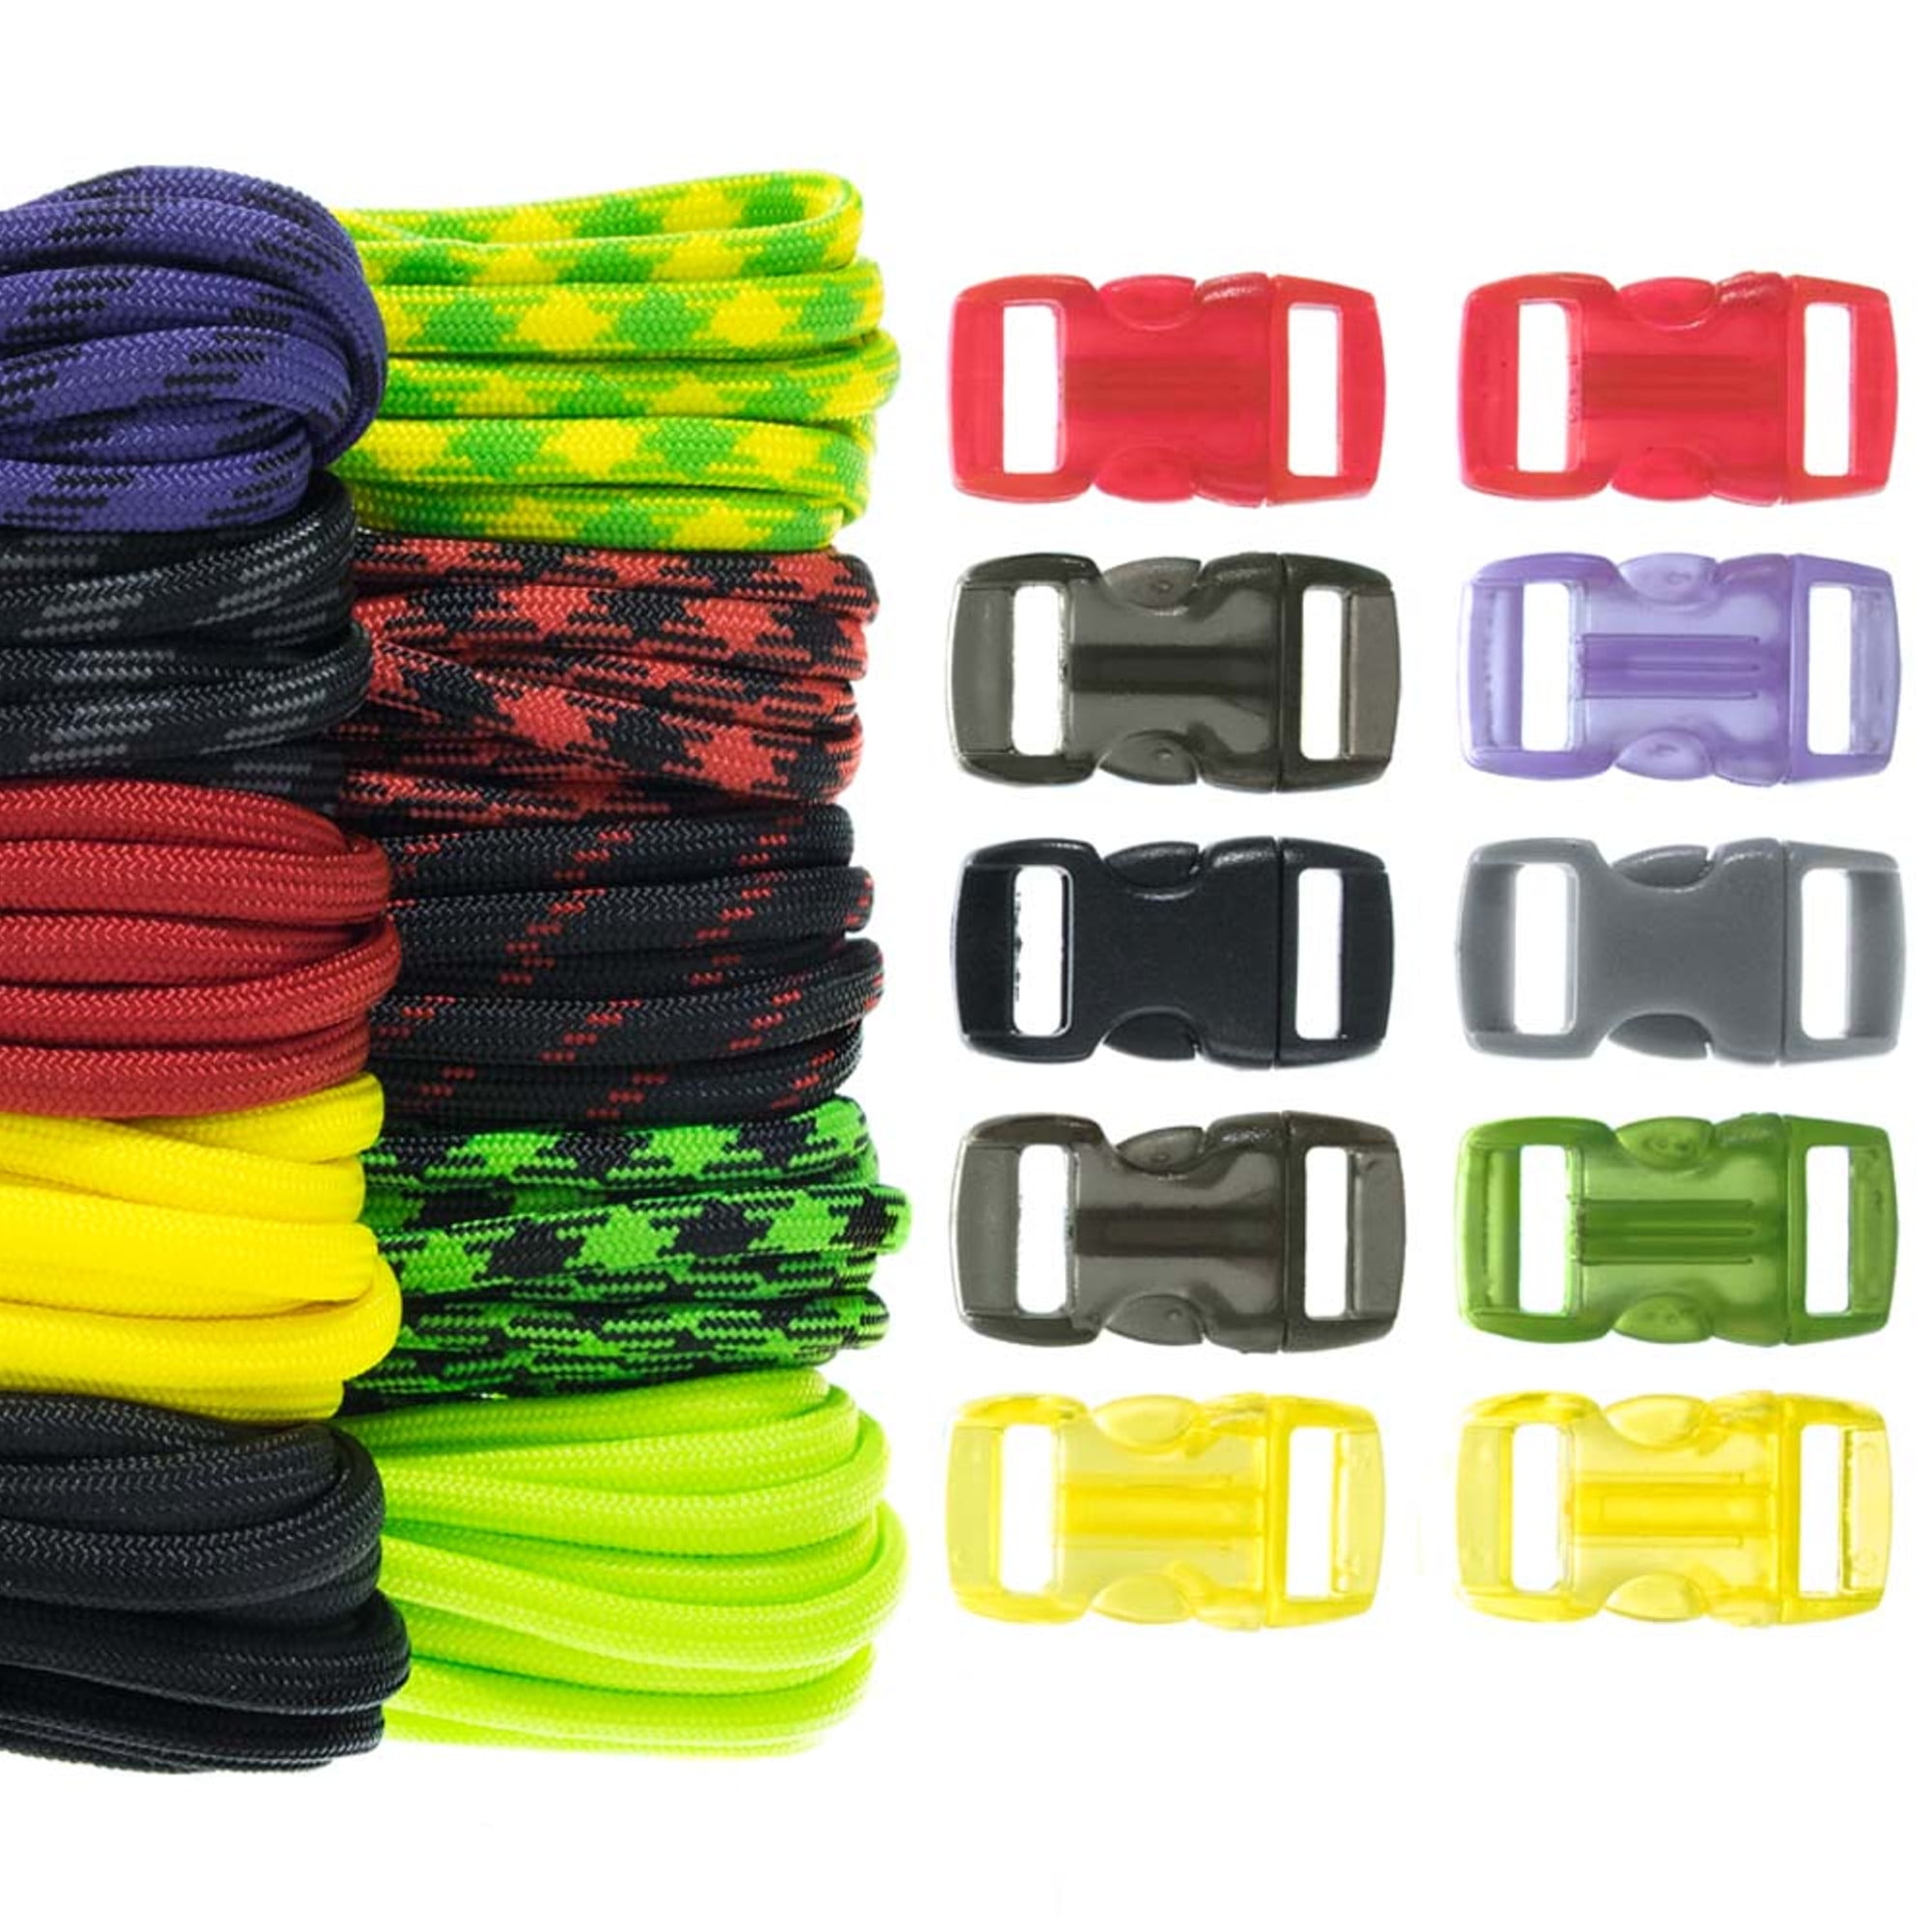 Foliage Green, 100 ft Geelife 640lb Parachute Cord Survival Utility 9 Strands Core 4mm Commercial Grade Paracord 